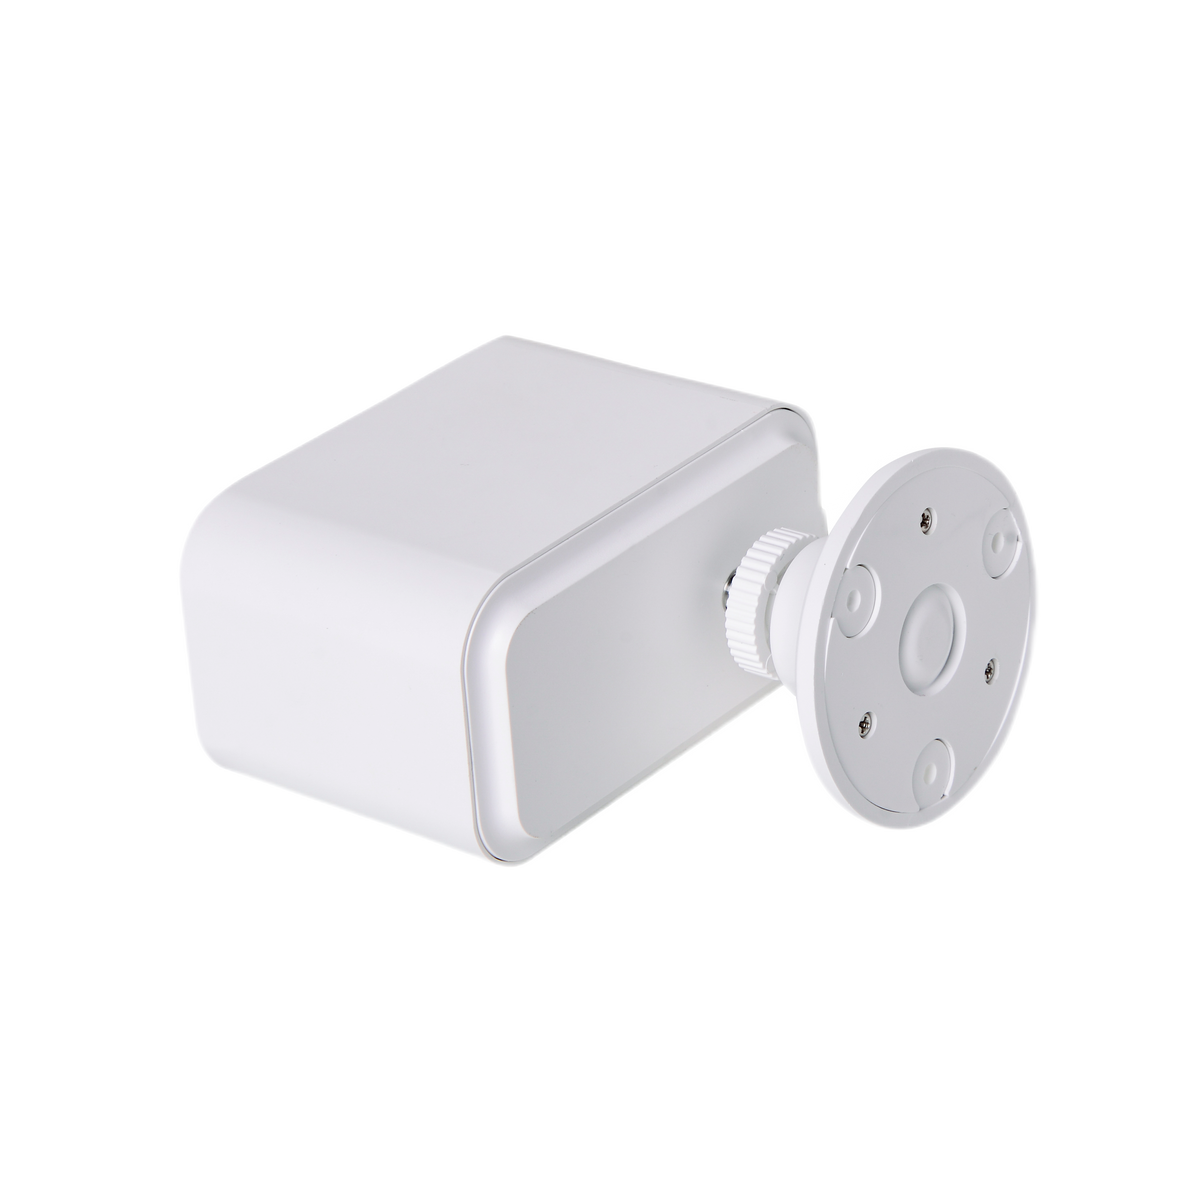 Baybot Live Wirefree - Wireless WiFi camera, upto 6 months battery backup, advanced motion detection, IP65 rated